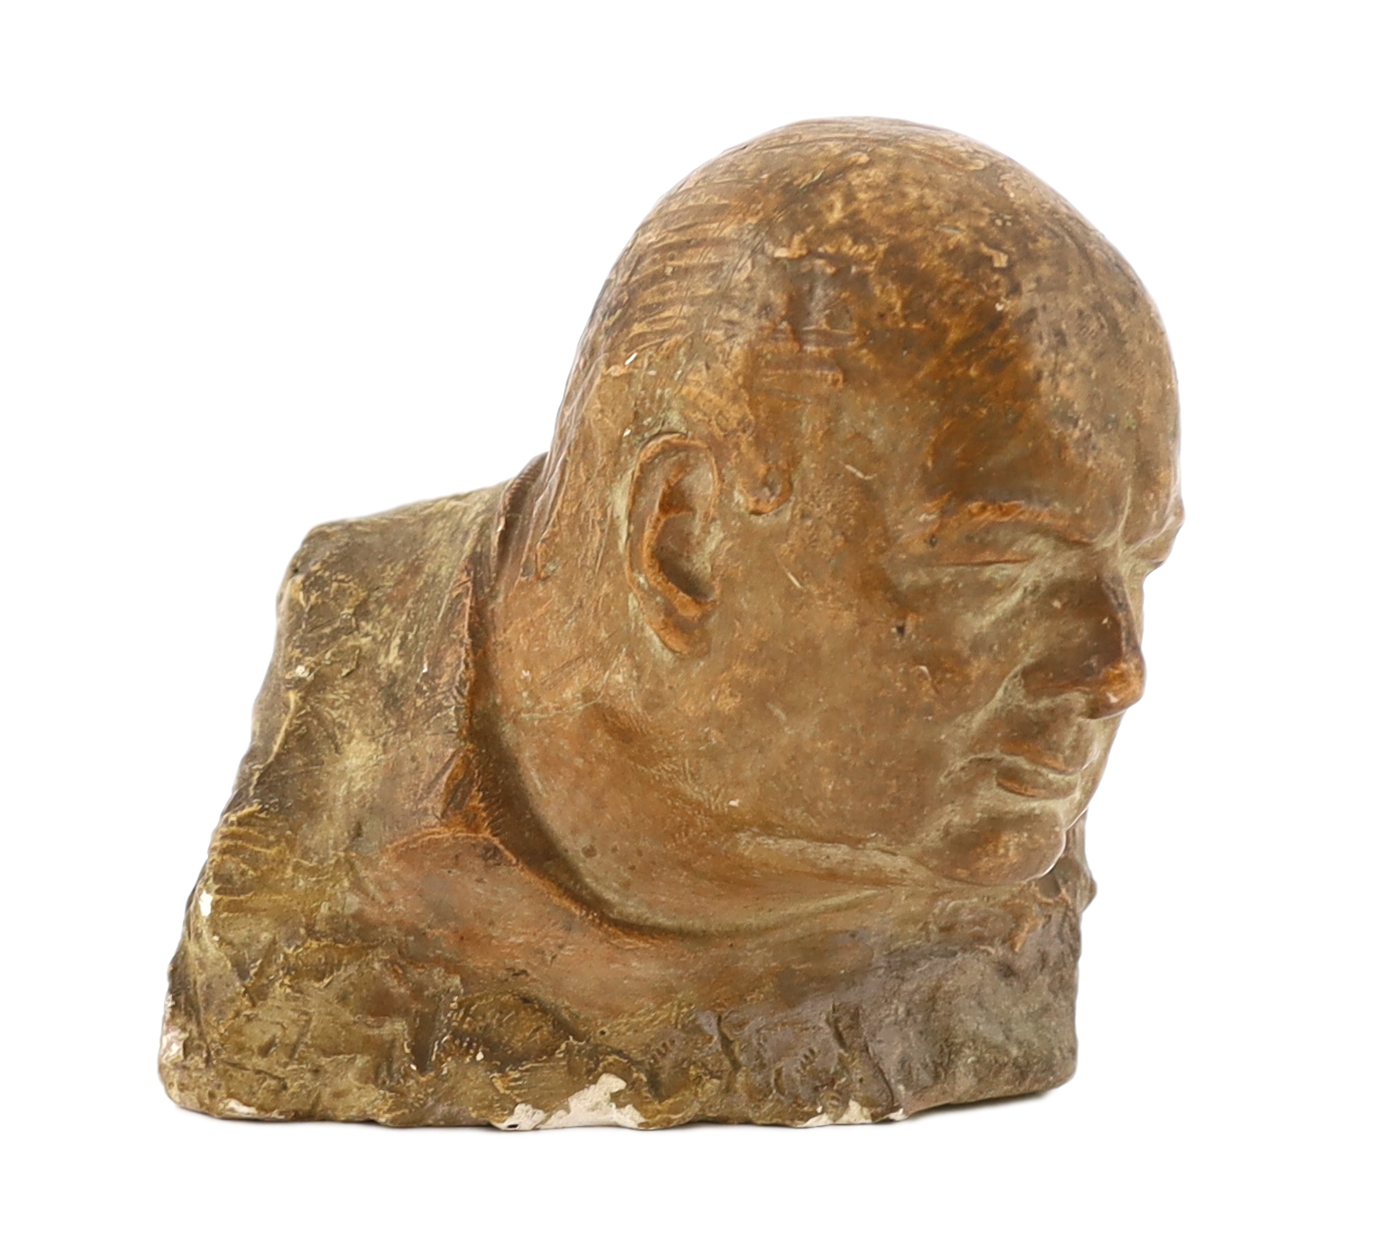 Churchill, Winston S. (1874-1965) - A plaster maquette for Head of Sir Winston Churchill by Oscar Nemon (1906-1985), with brown patination                                                                                  